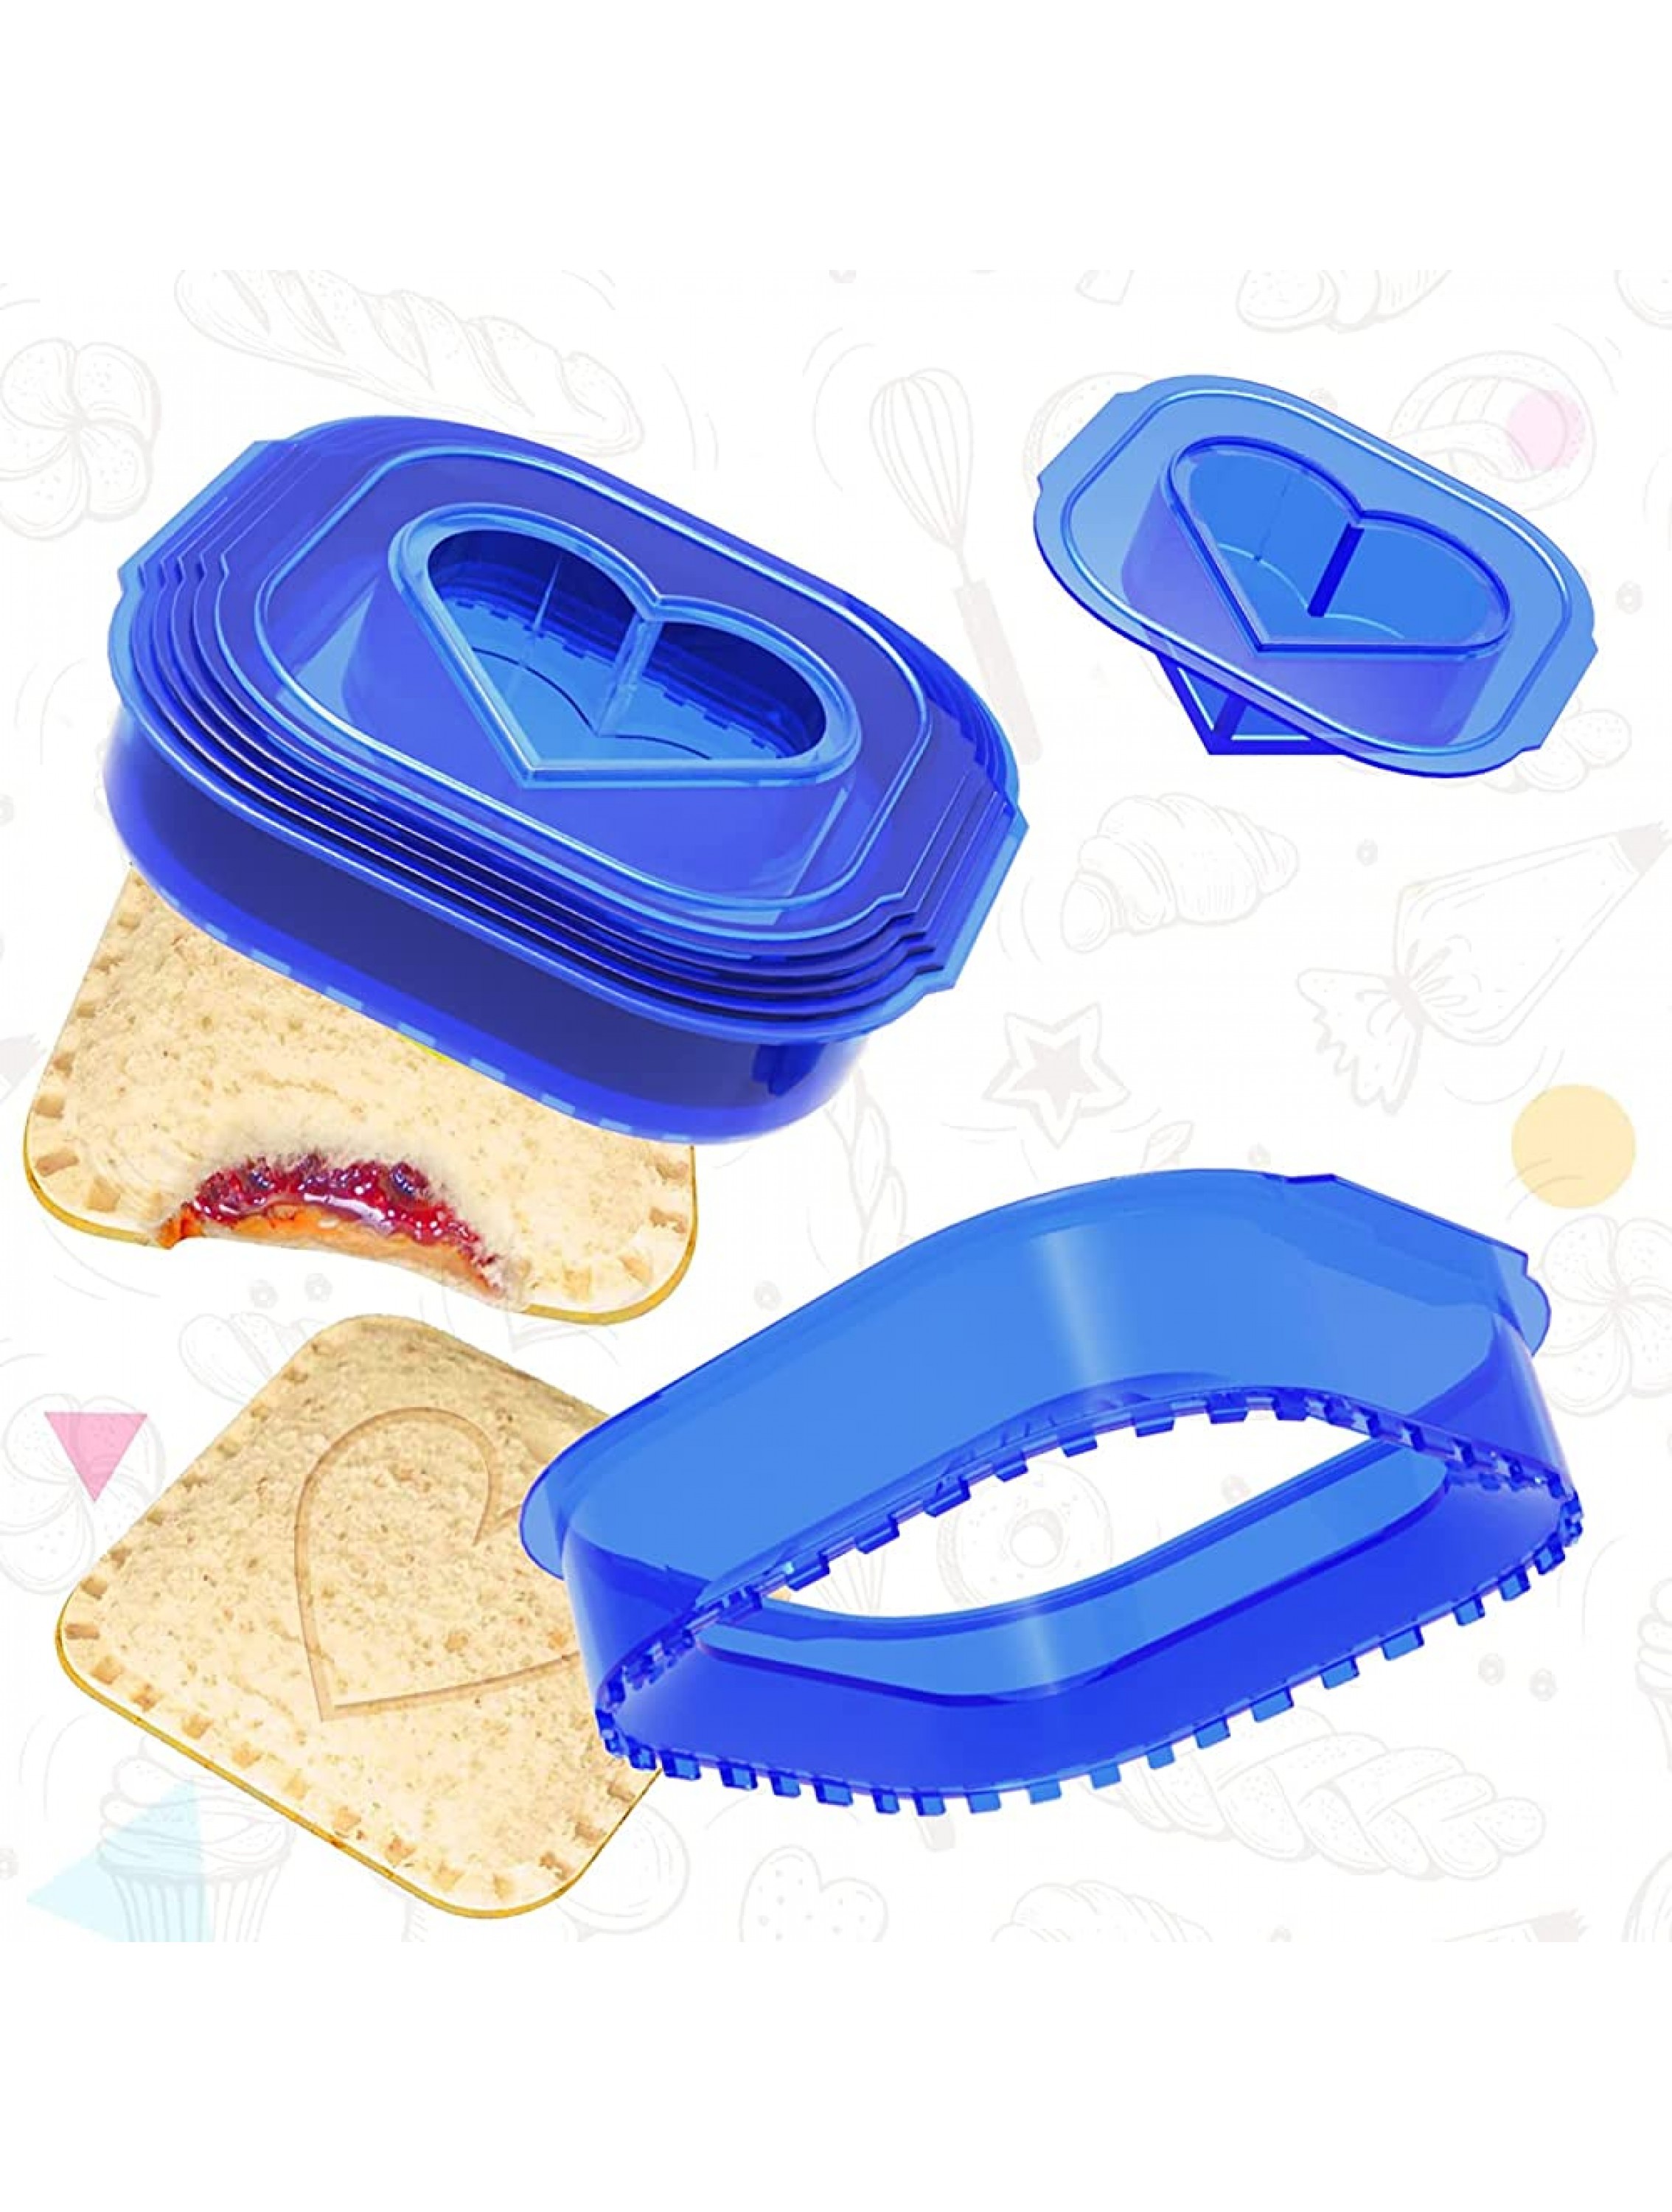 FDGDFH Sandwich Cutter and Sealer Uncrustables Sandwich Maker ,Sandwich Cutter for Kids,Great for Lunchbox and Bento Box,Square Shapes Sandwich Decruster - BYAGIF2TI